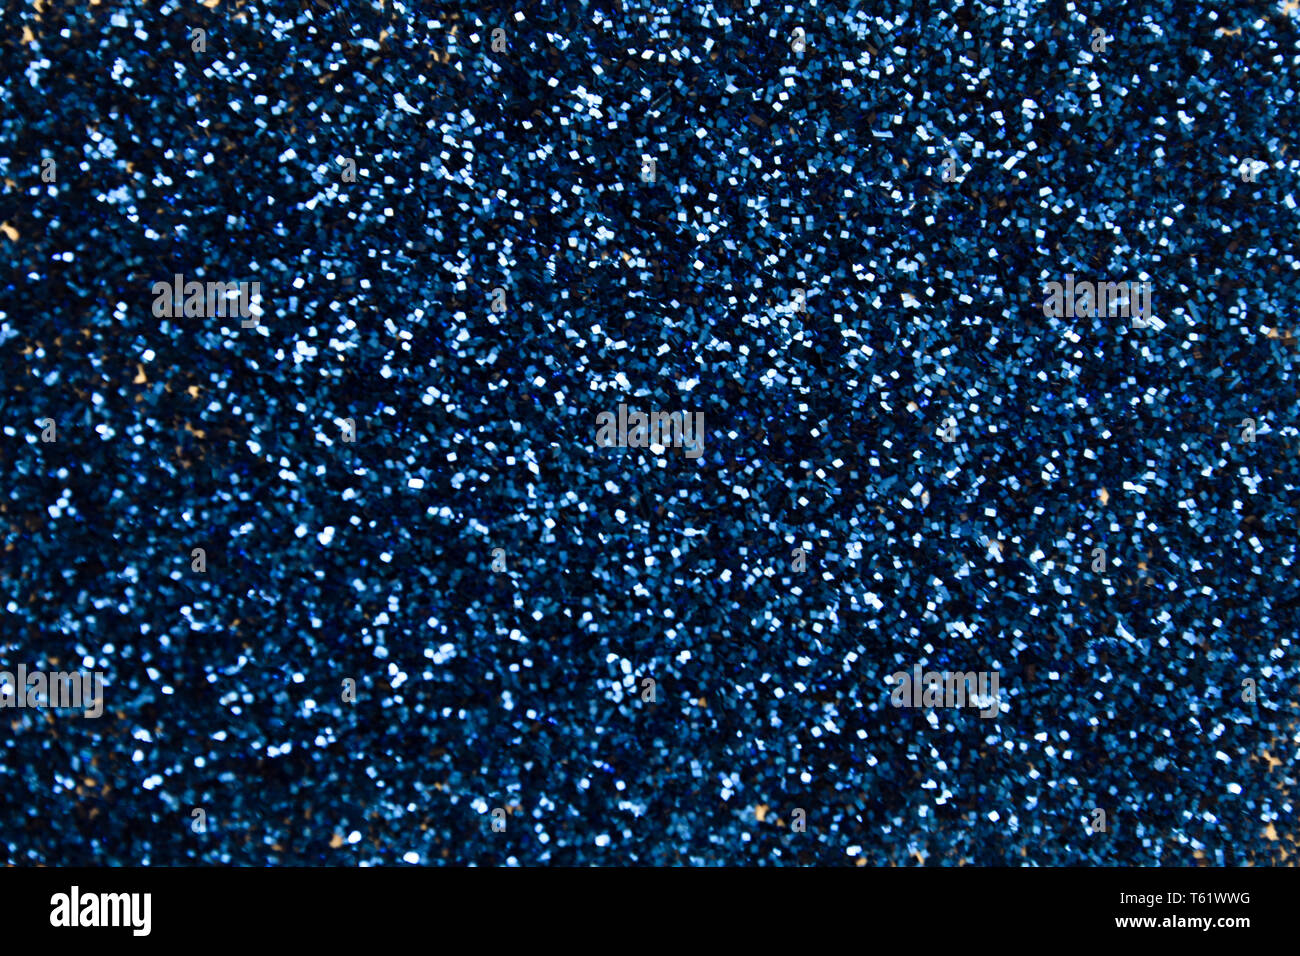 https://c8.alamy.com/comp/T61WWG/background-blue-sequin-fabric-sequins-in-bright-colors-fashion-fabric-glitter-sequins-T61WWG.jpg